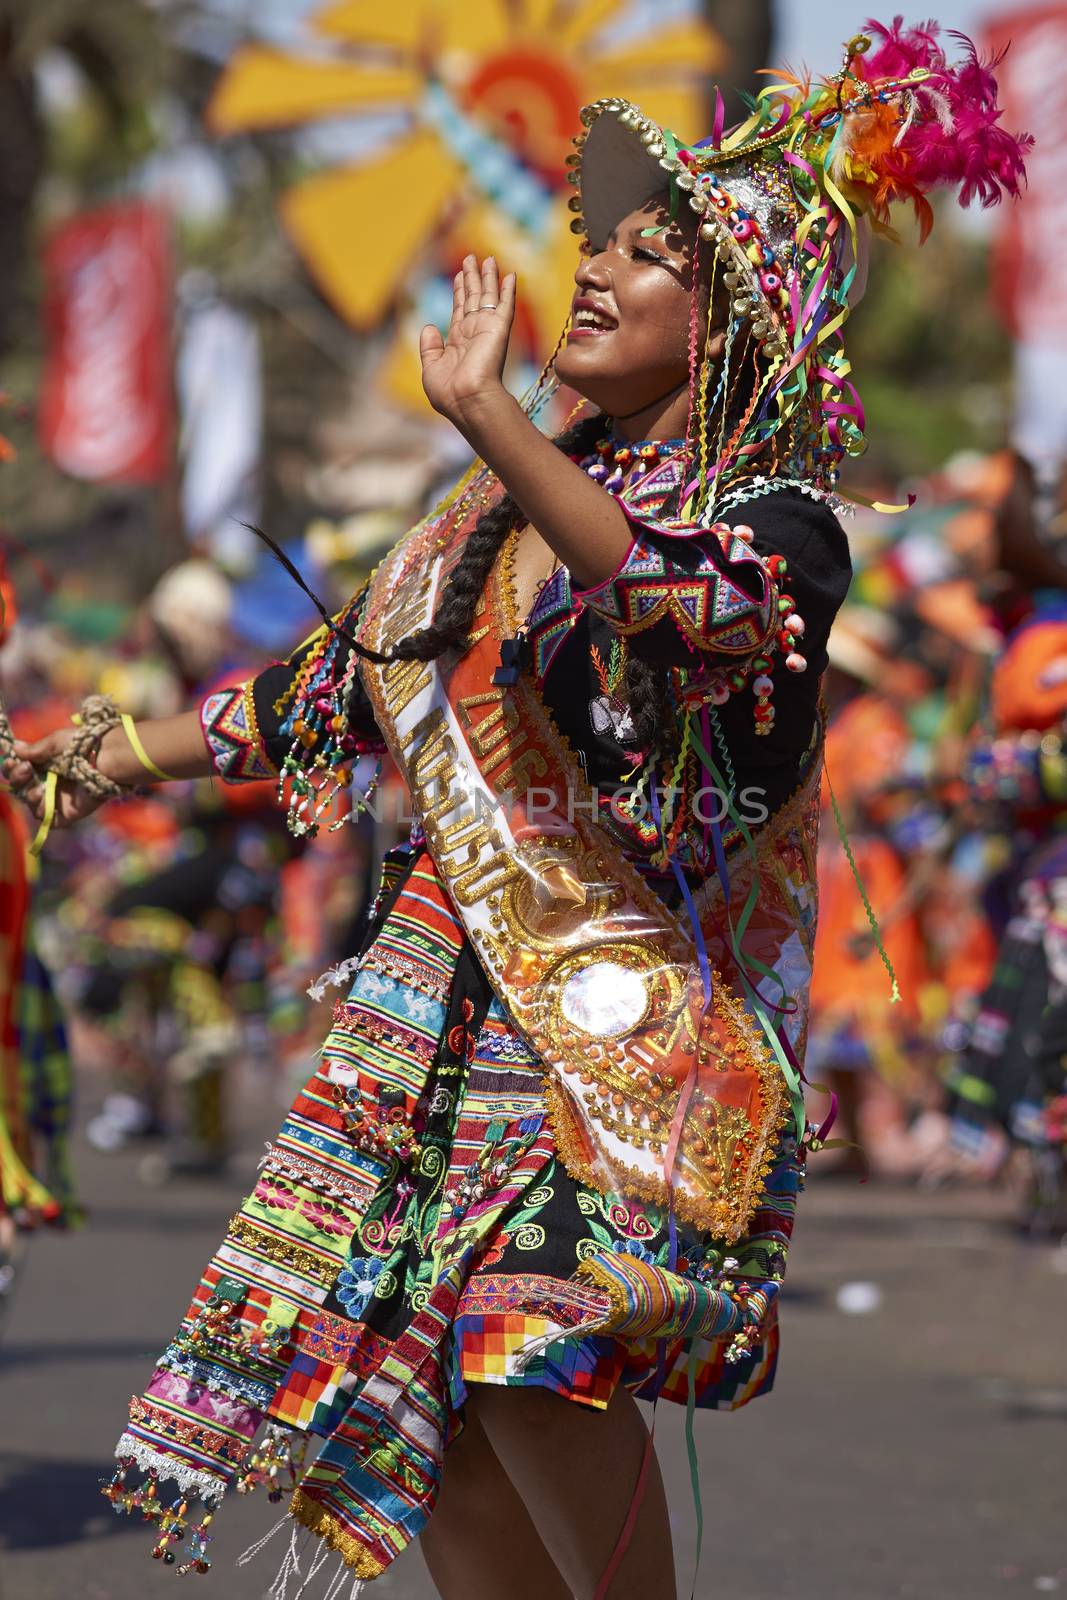 Tinku dancing group in colourful costumes performing a traditional ritual dance as part of the Carnaval Andino con la Fuerza del Sol in Arica, Chile.